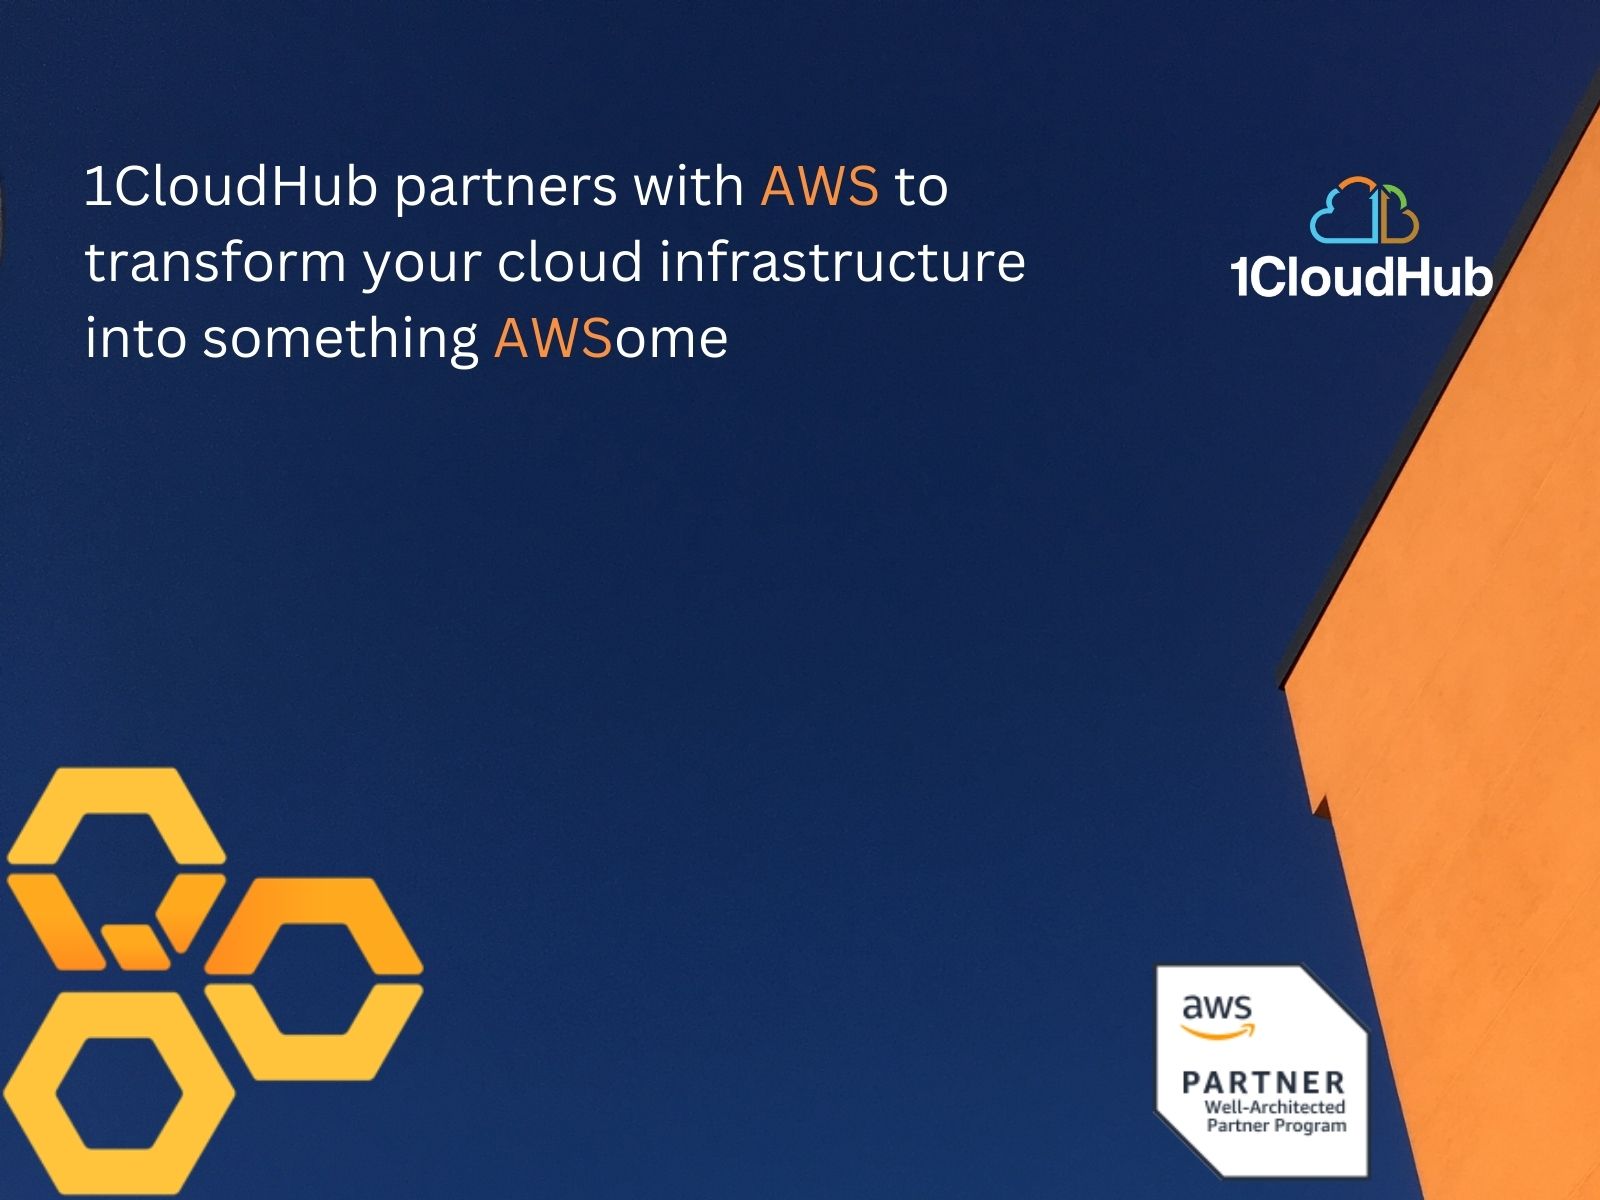 1CloudHub partners with AWS to transform your cloud infrastructure into something AWSome